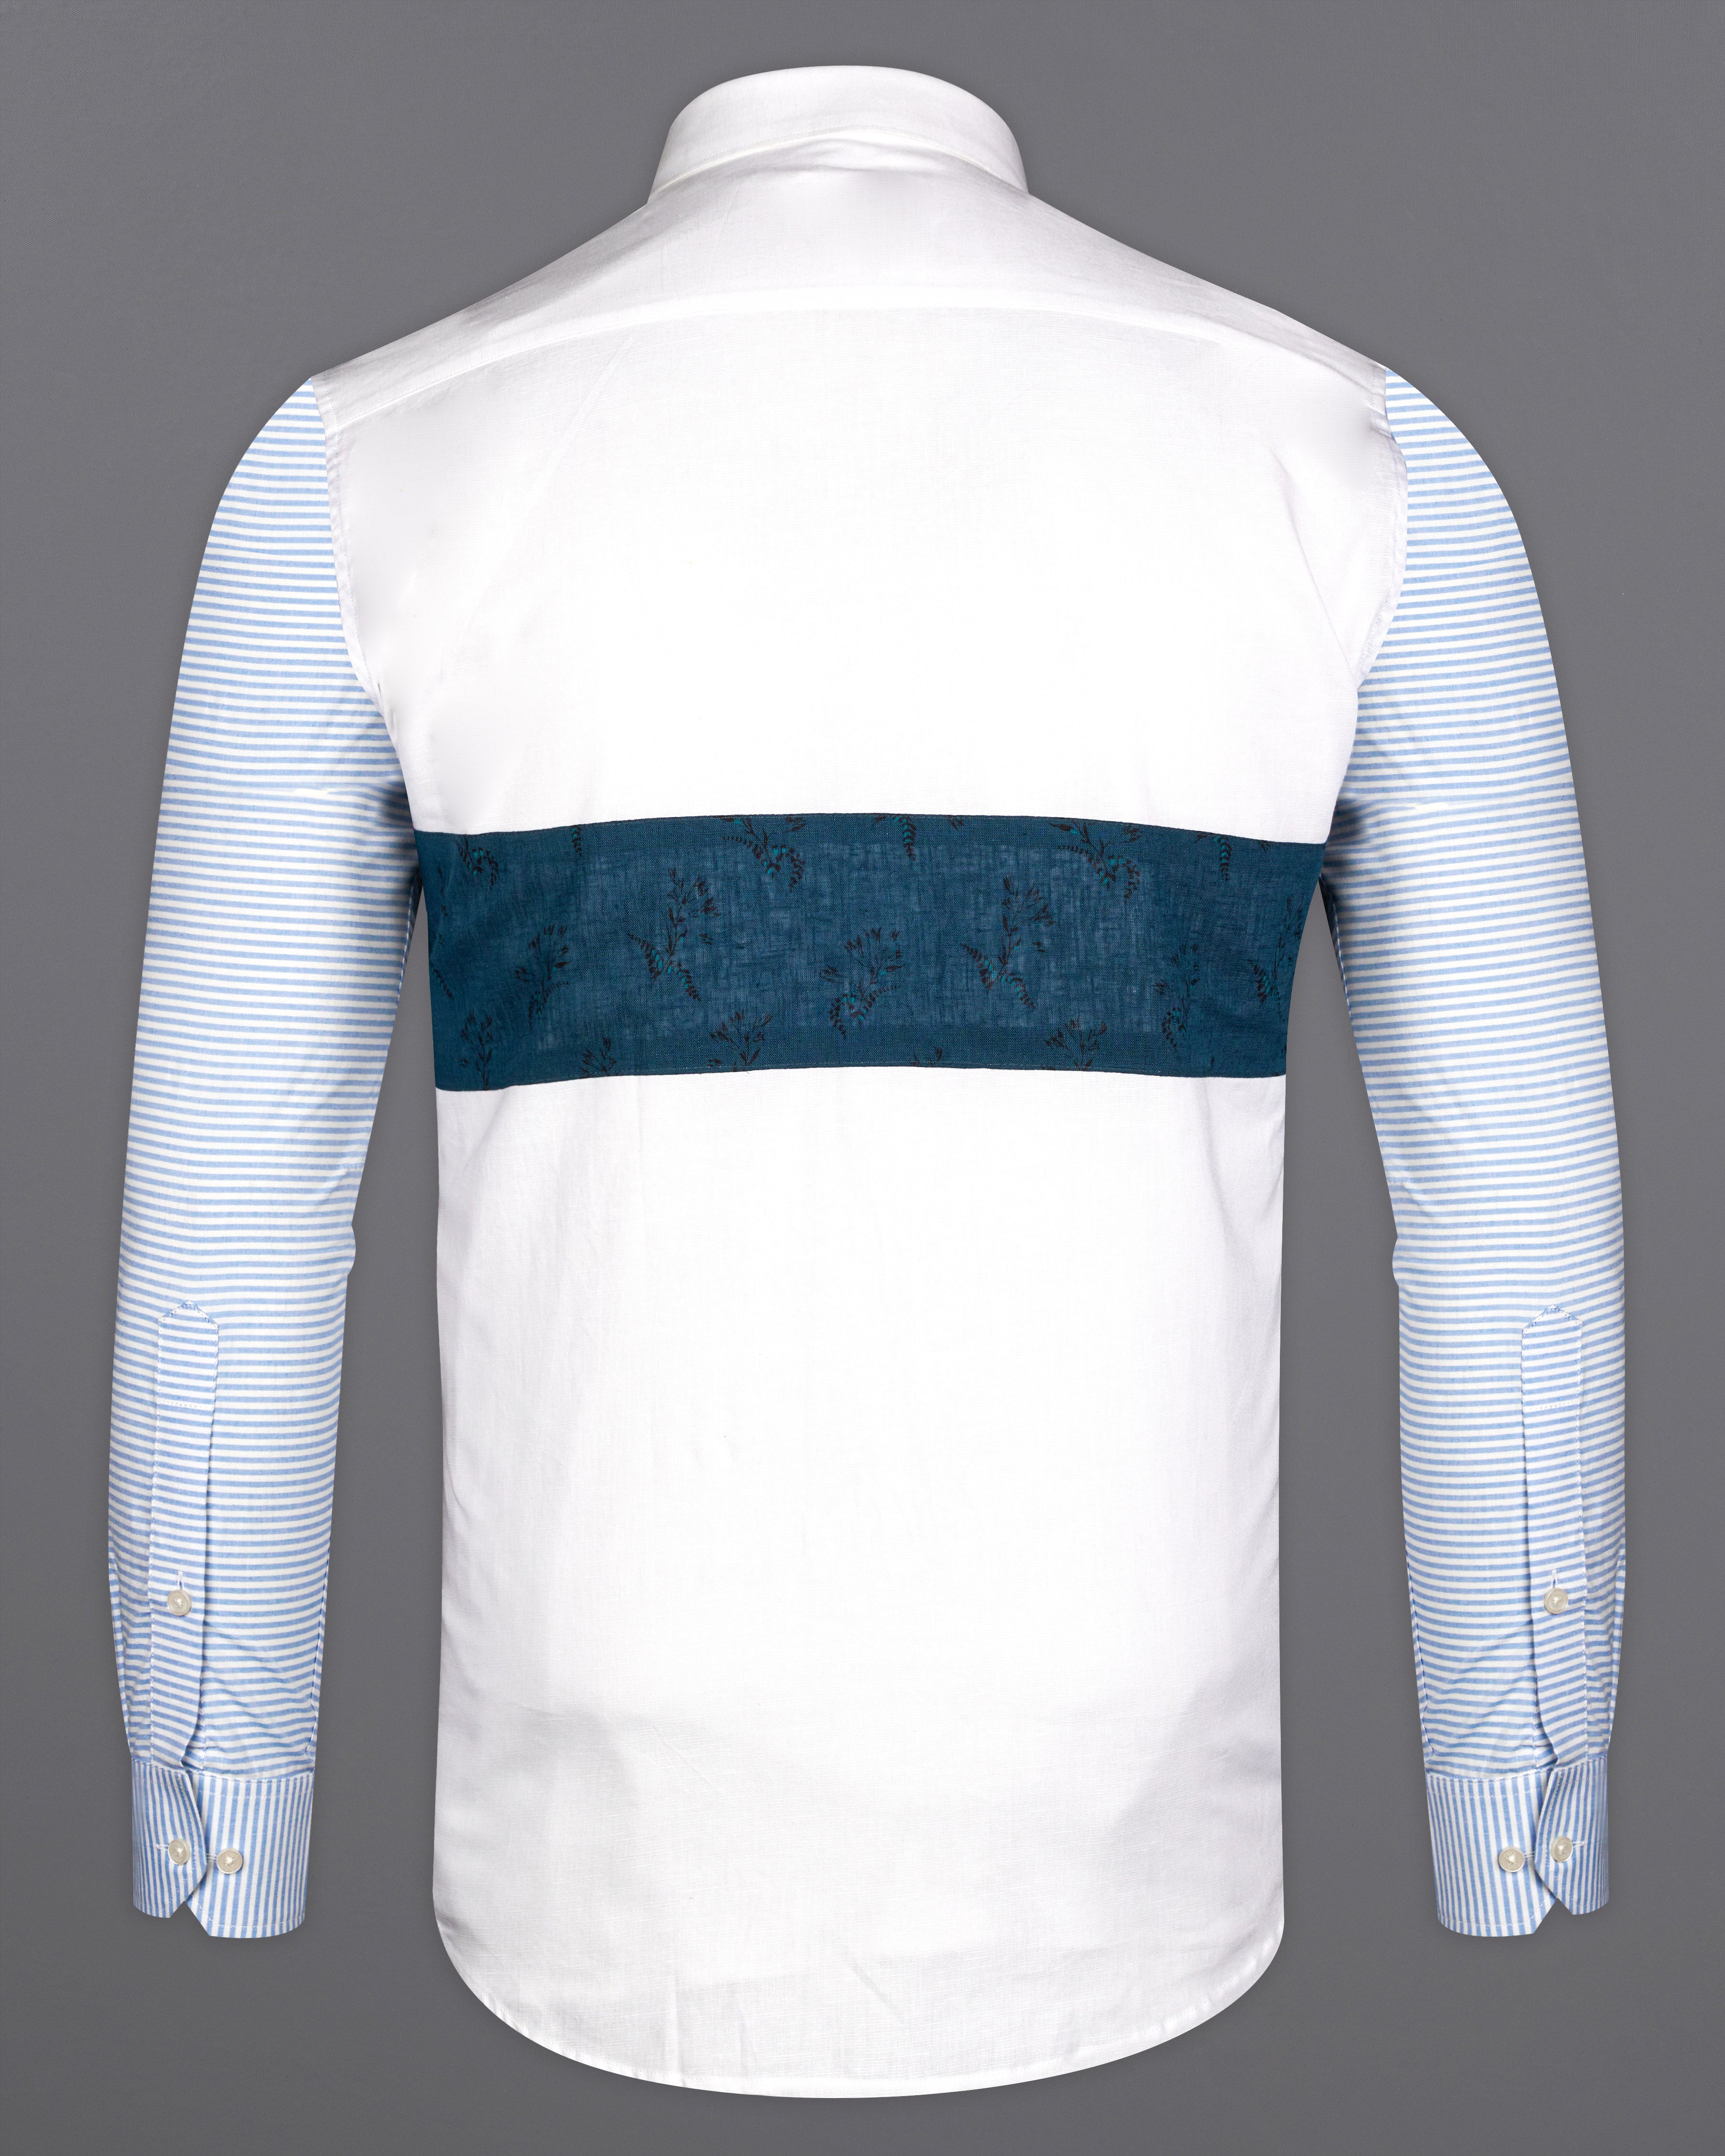 Off White with CloudBurst Blue Patch Work Luxurious Linen Designer Shirt 9834-P177-38, 9834-P177-H-38, 9834-P177-39, 9834-P177-H-39, 9834-P177-40, 9834-P177-H-40, 9834-P177-42, 9834-P177-H-42, 9834-P177-44, 9834-P177-H-44, 9834-P177-46, 9834-P177-H-46, 9834-P177-48, 9834-P177-H-48, 9834-P177-50, 9834-P177-H-50, 9834-P177-52, 9834-P177-H-52